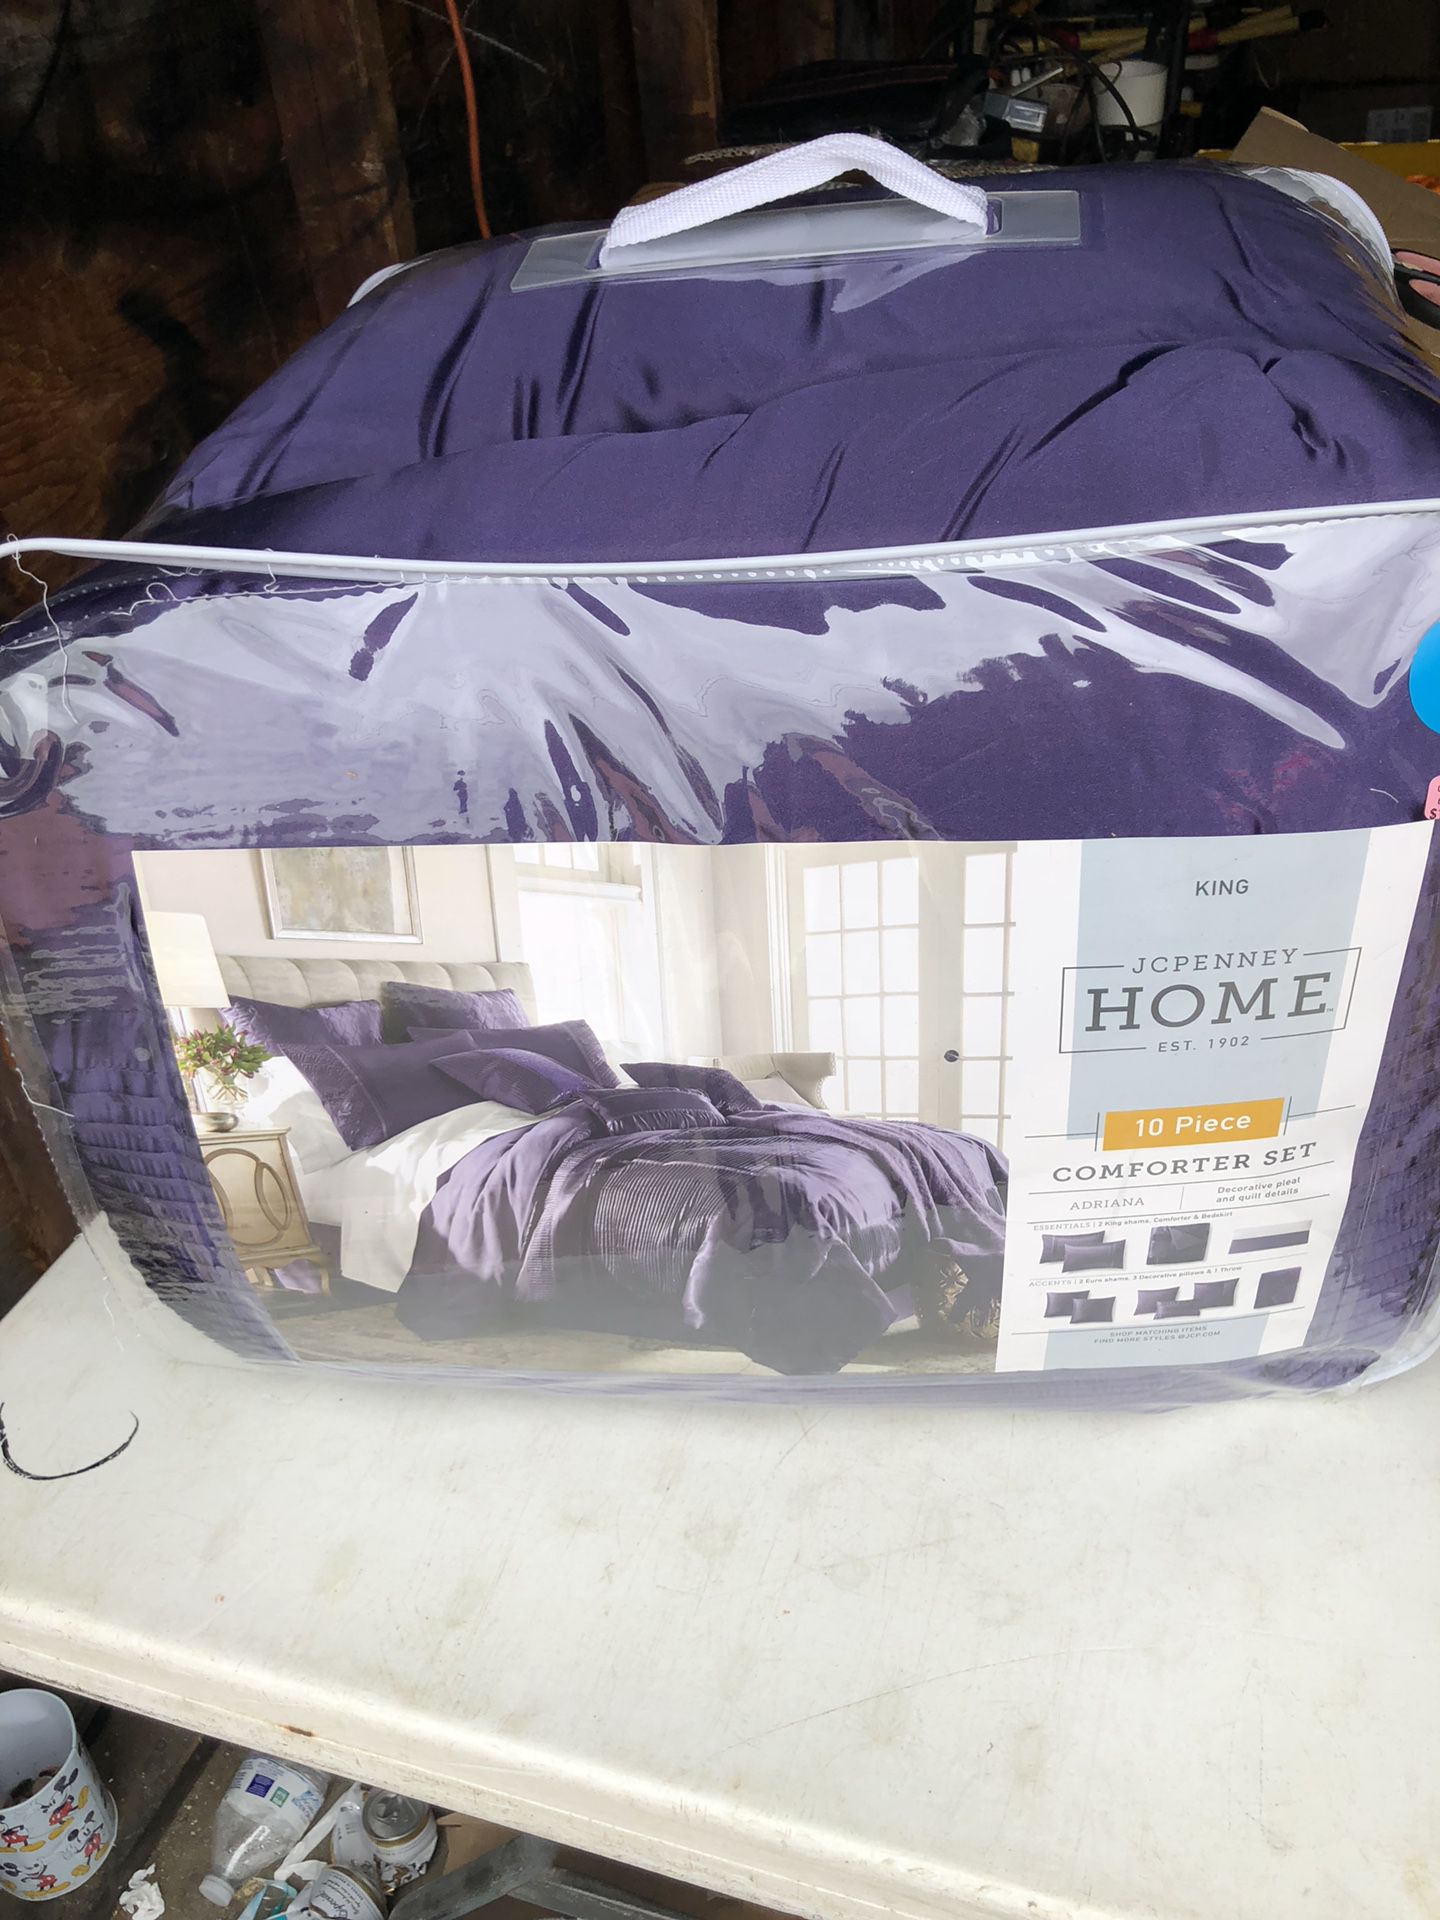 Home comforter from JC penny